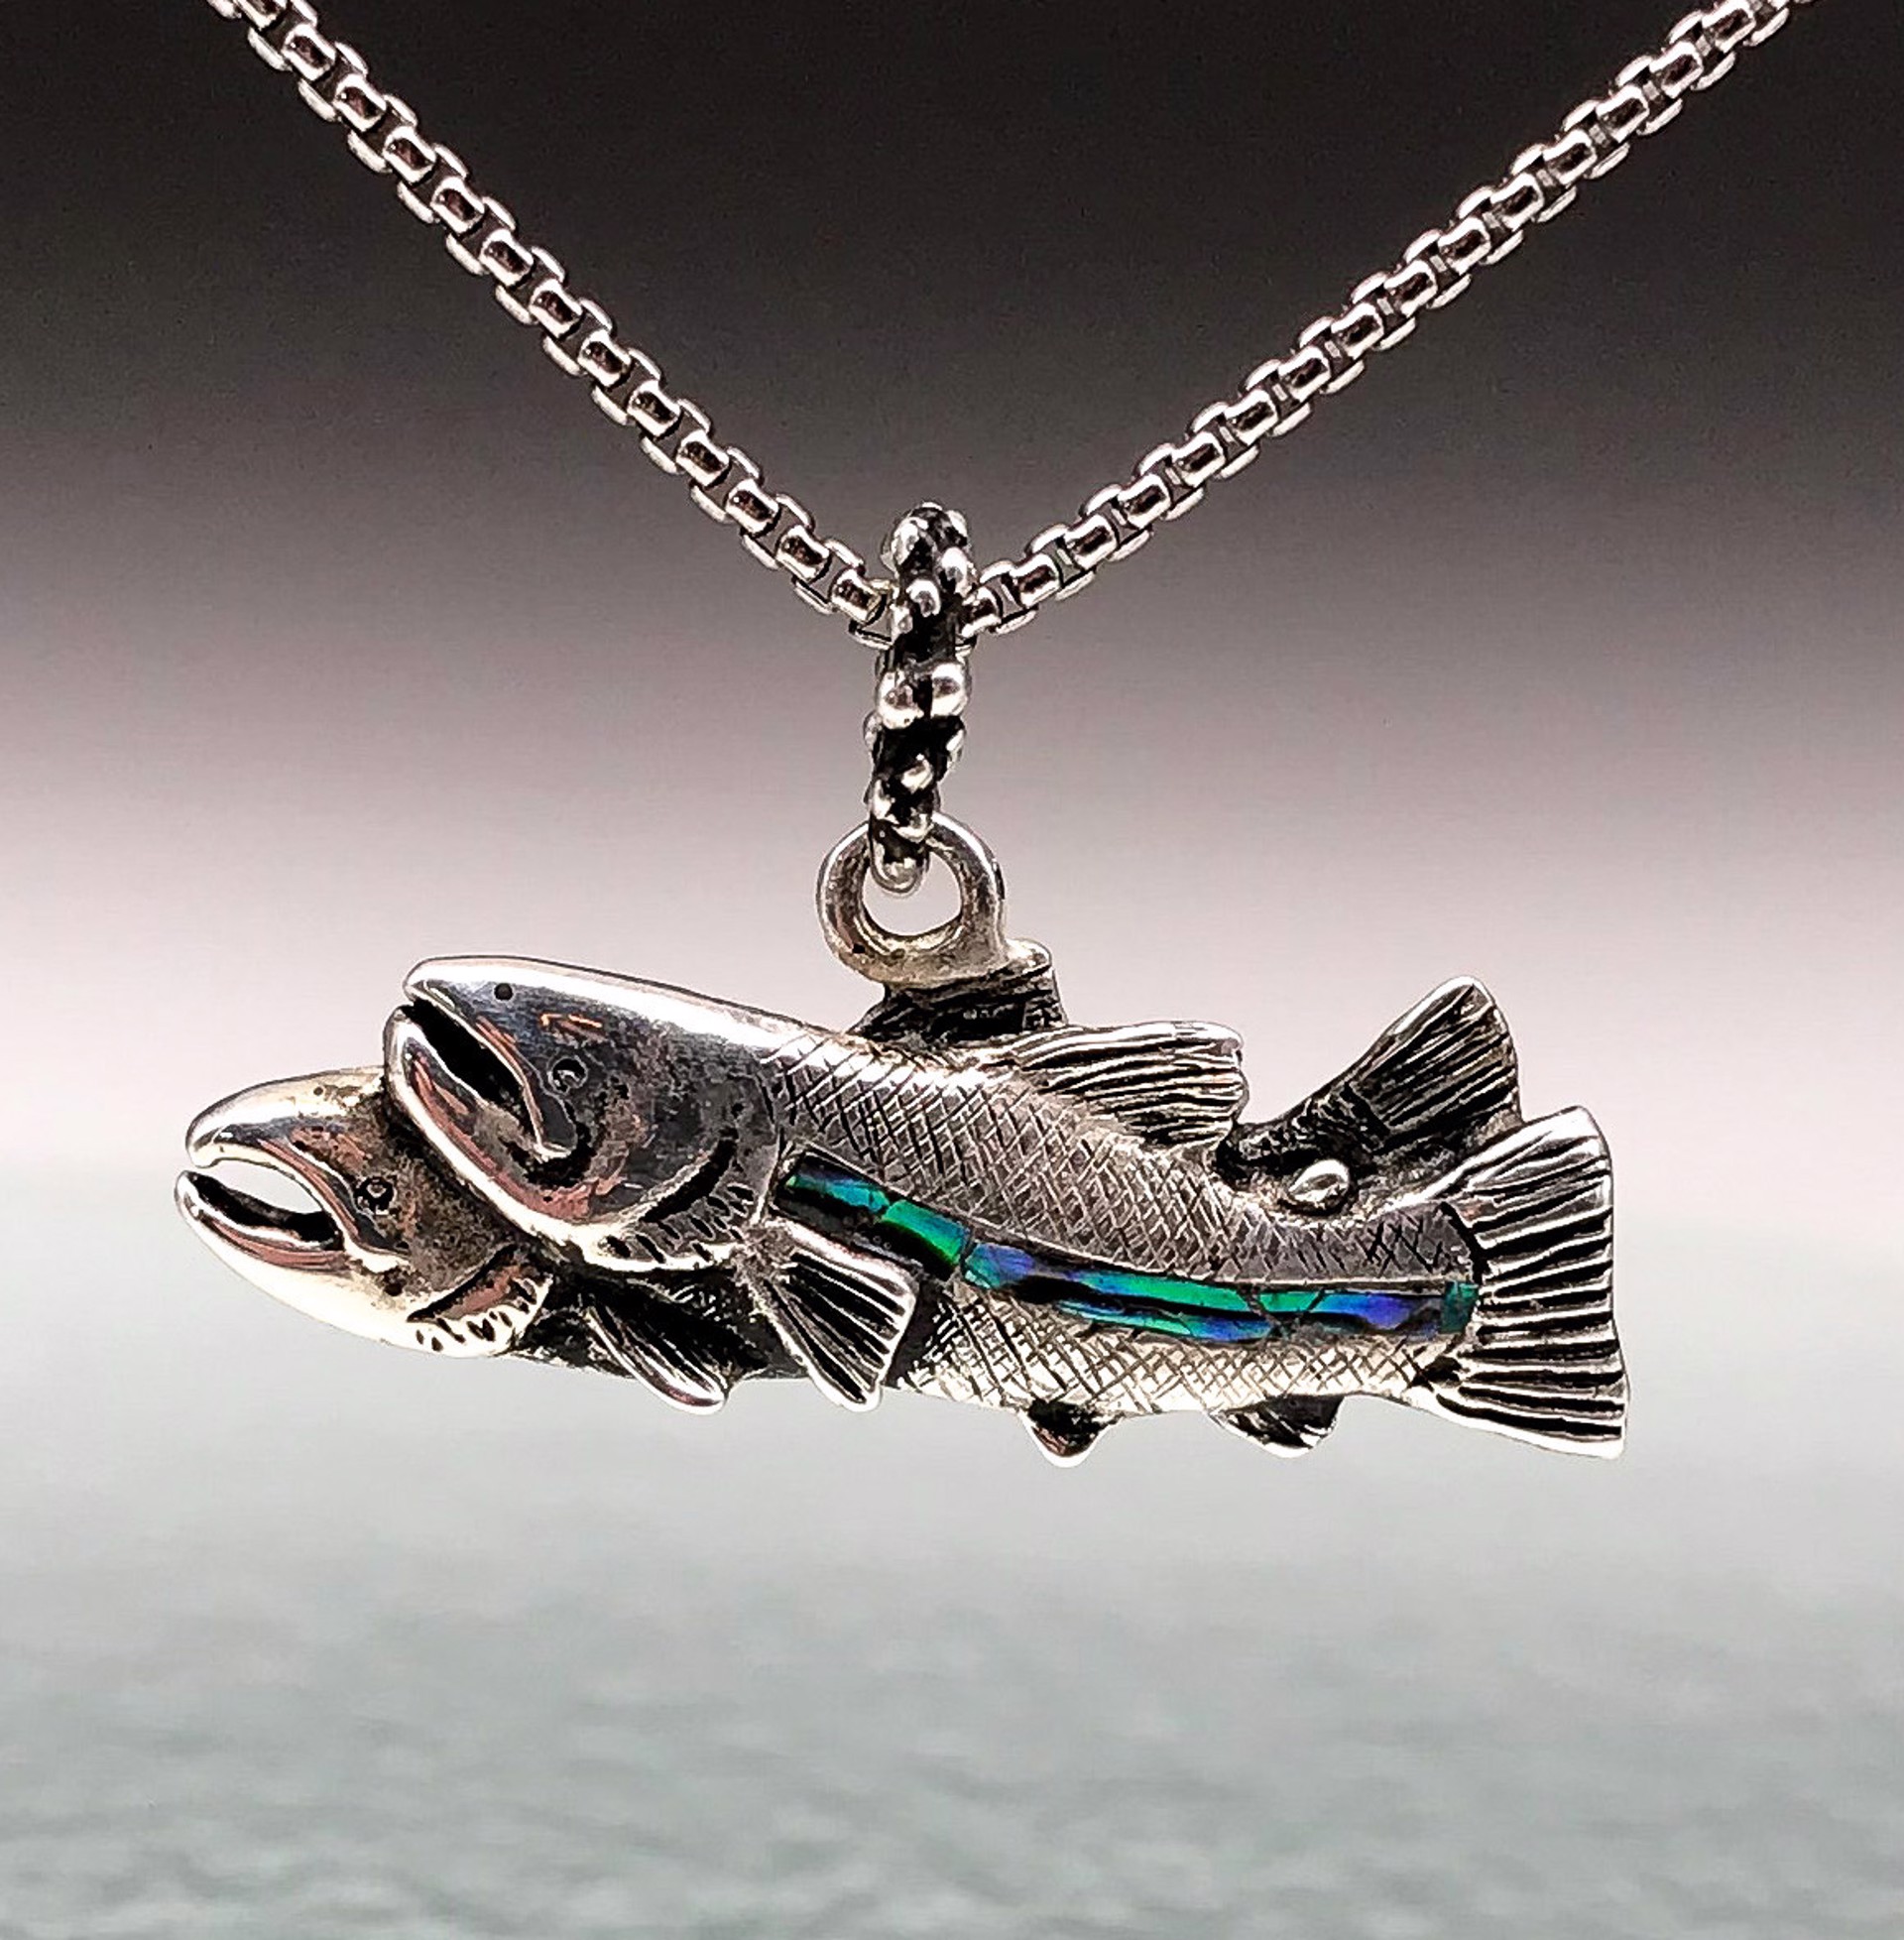 Two Salmon Pendant with Abalone shell inlay by Thomas Tietze